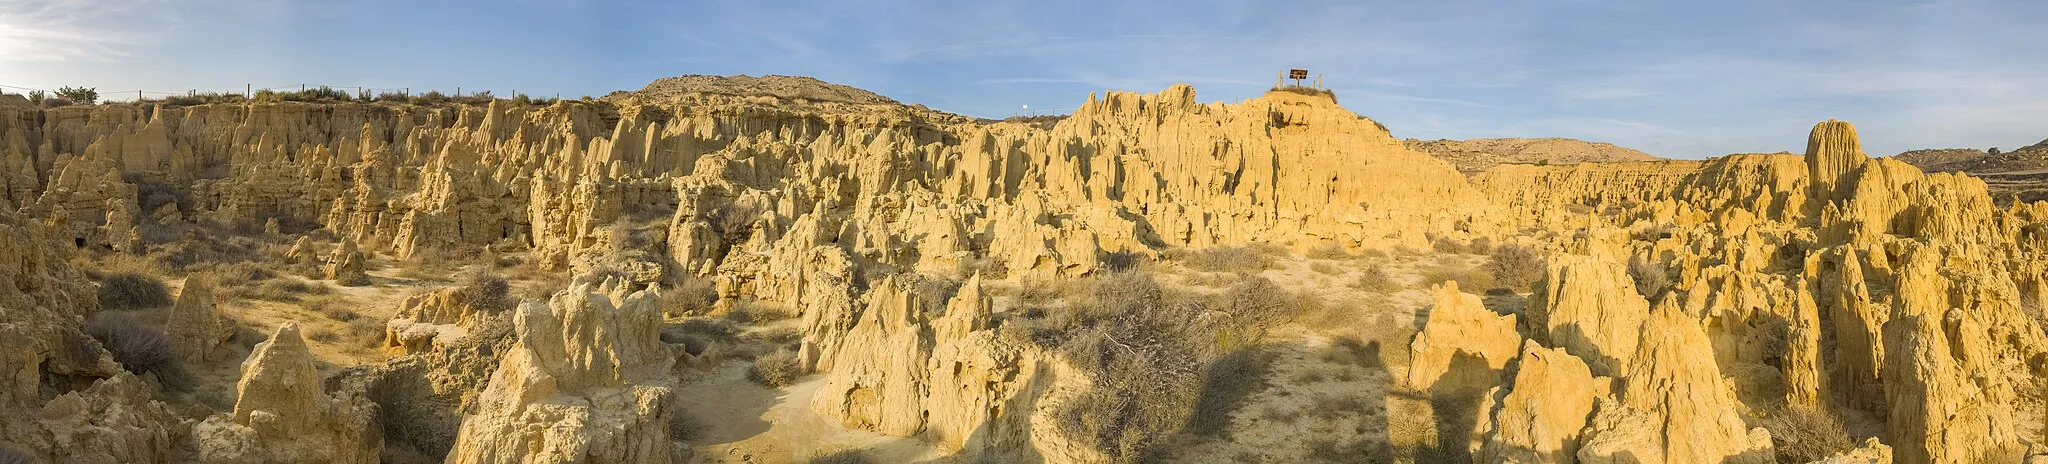 Photo showing: Panorama view of Los Aguarales de Valpalmas, a rare, fragile and dynamic geological phenomena located near Valpalmas, Zaragoza, Spain. The landscape is the result of water flows over fragile material in a process known as piping.